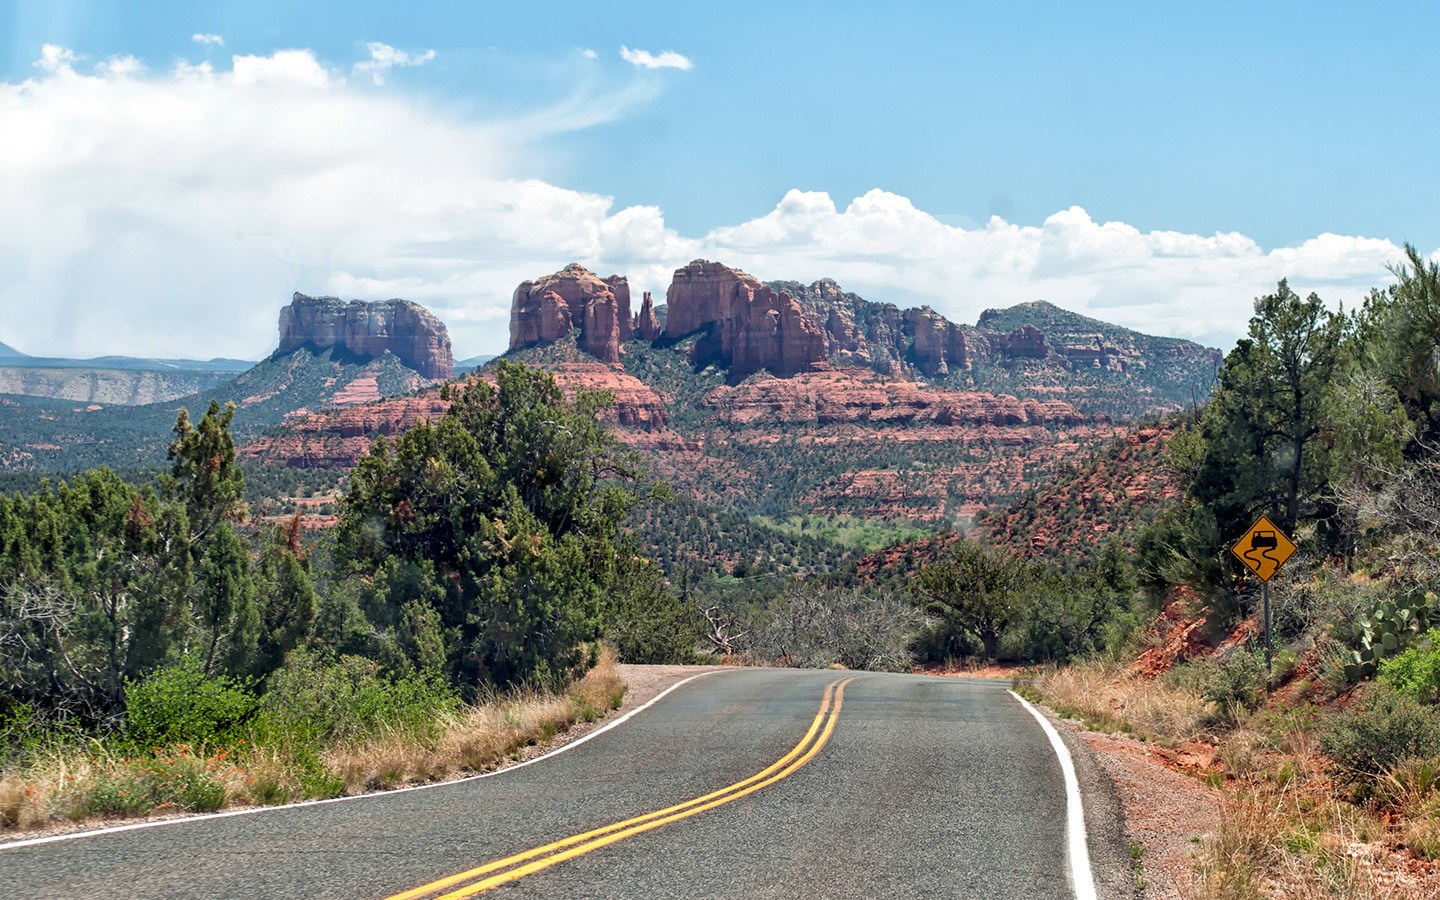 Sedona’s Red Rock Loop, a southwest USA scenic drive